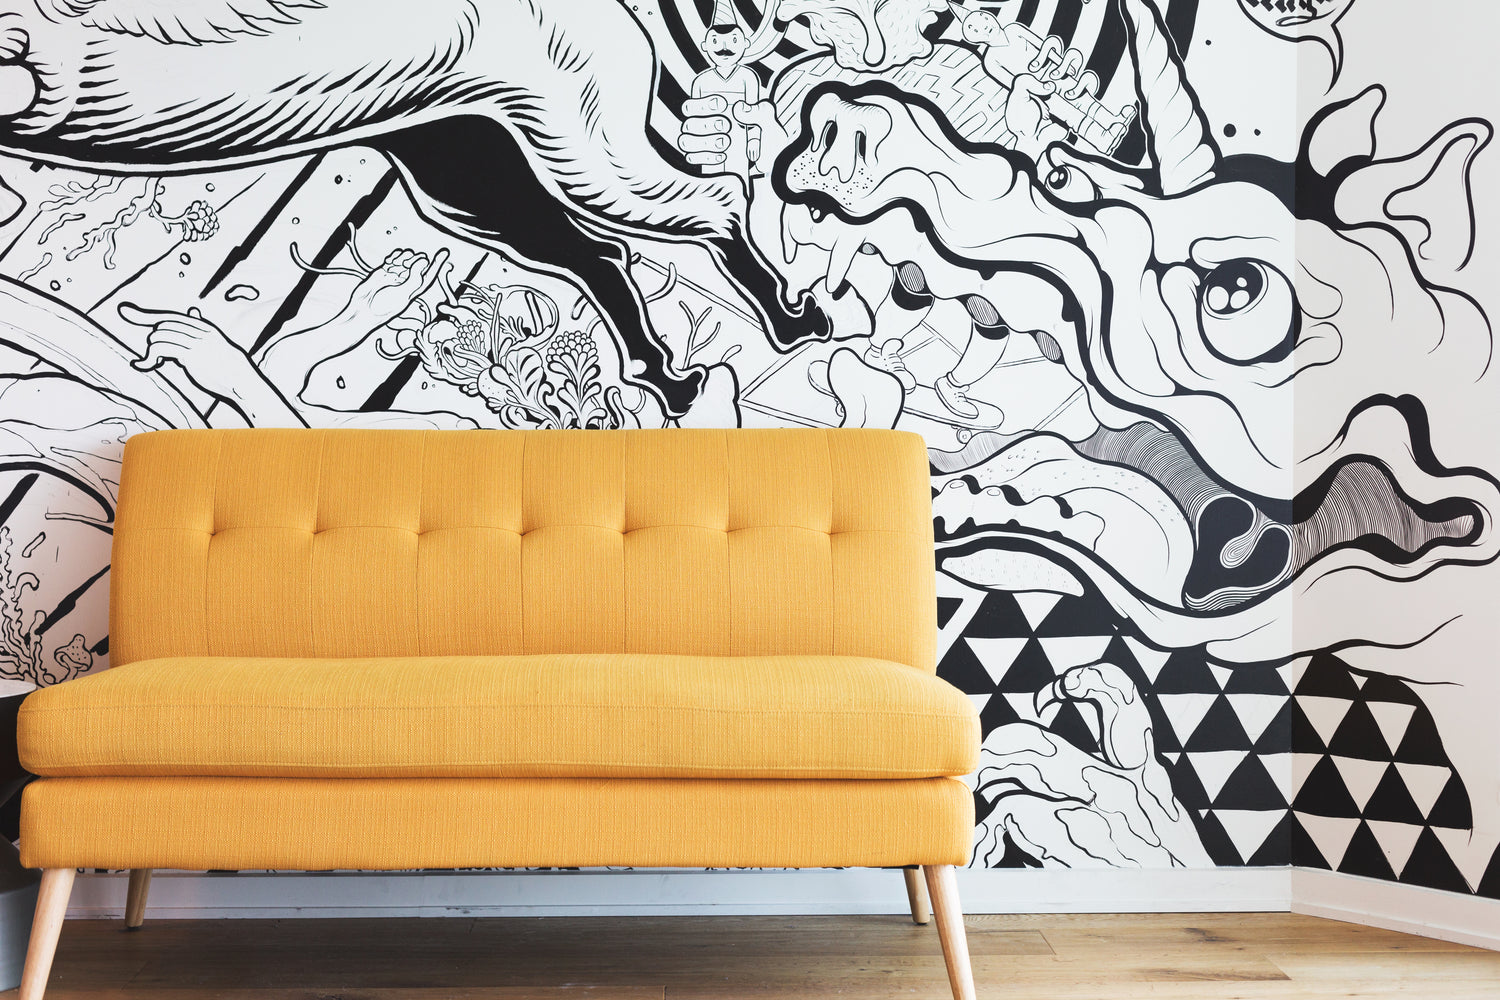 A yellow mid-century modern couch in front of a black and white mural